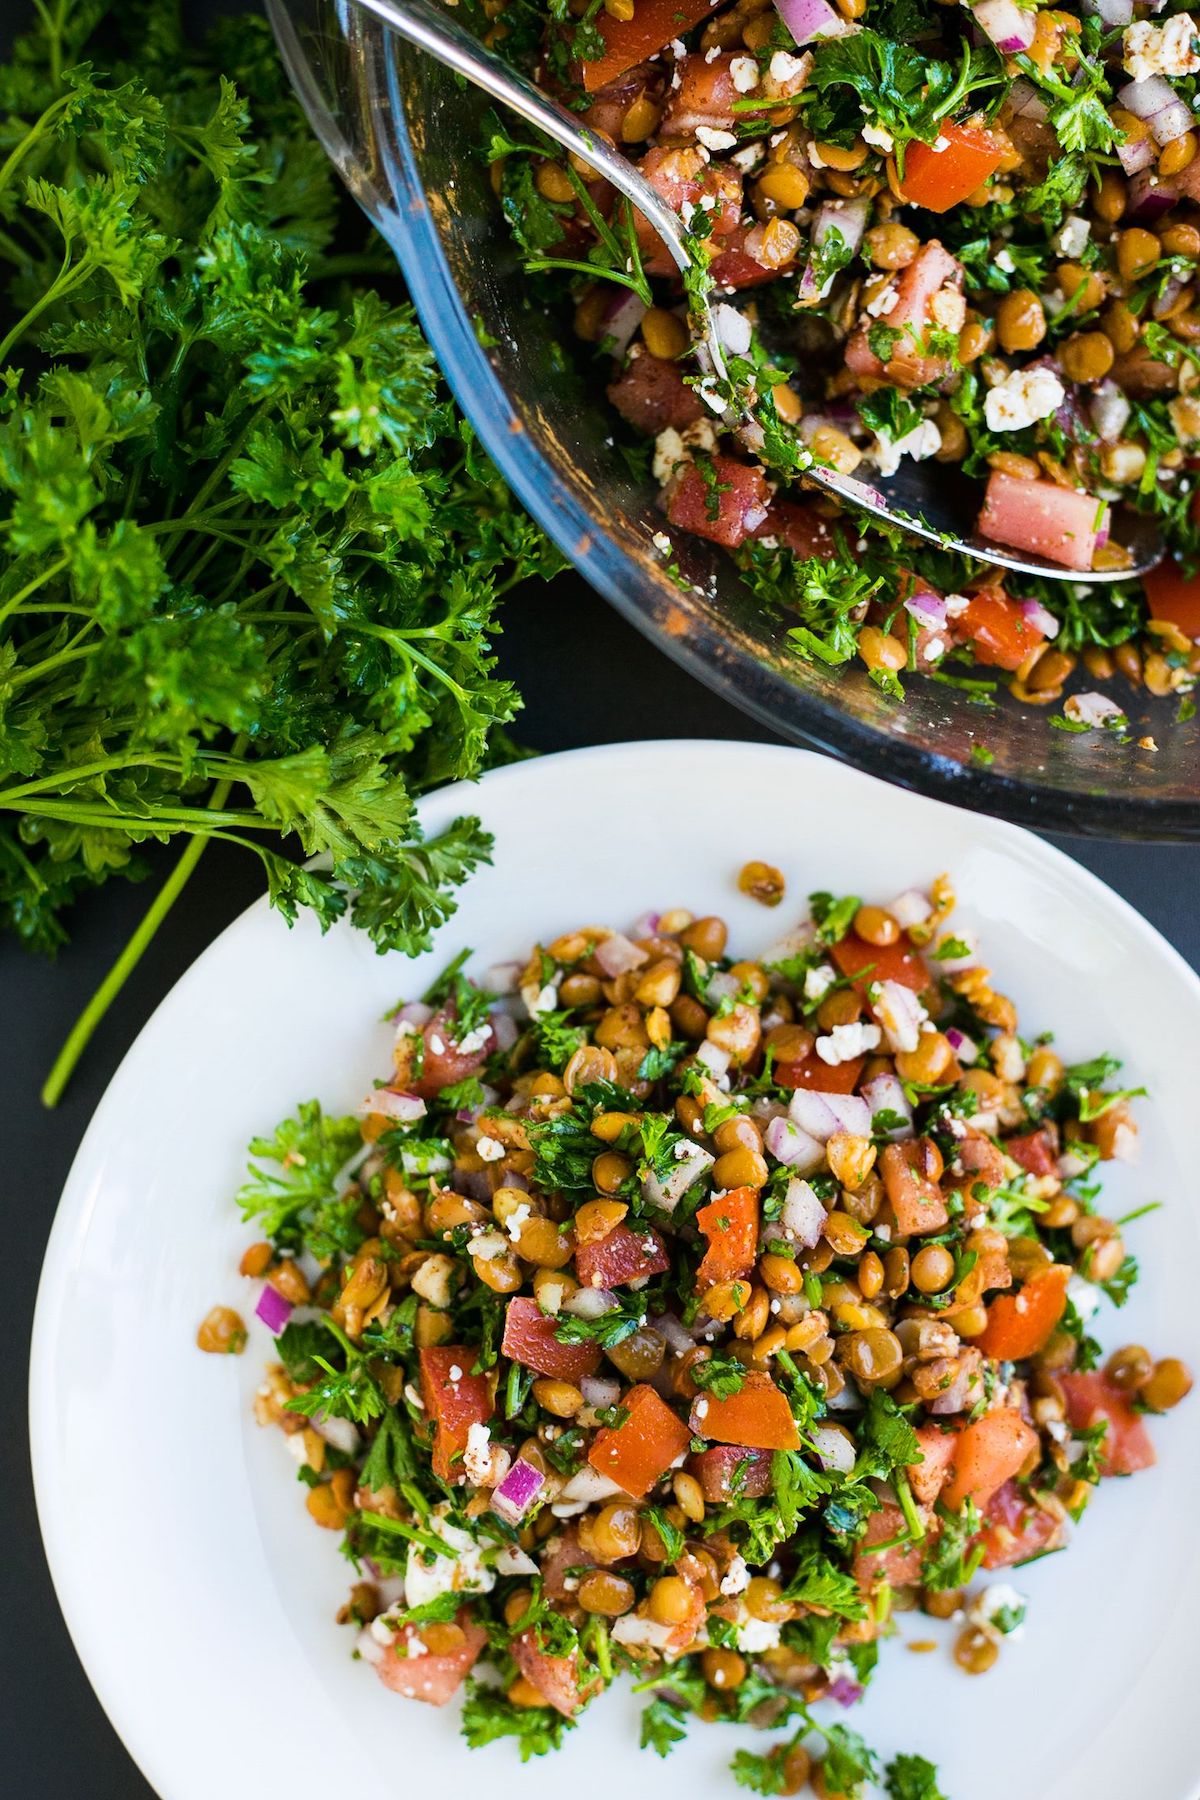 10 Mediterranean Diet Approved Recipes to Add to Your Meal Plan - Lentil & Feta Tabbouleh